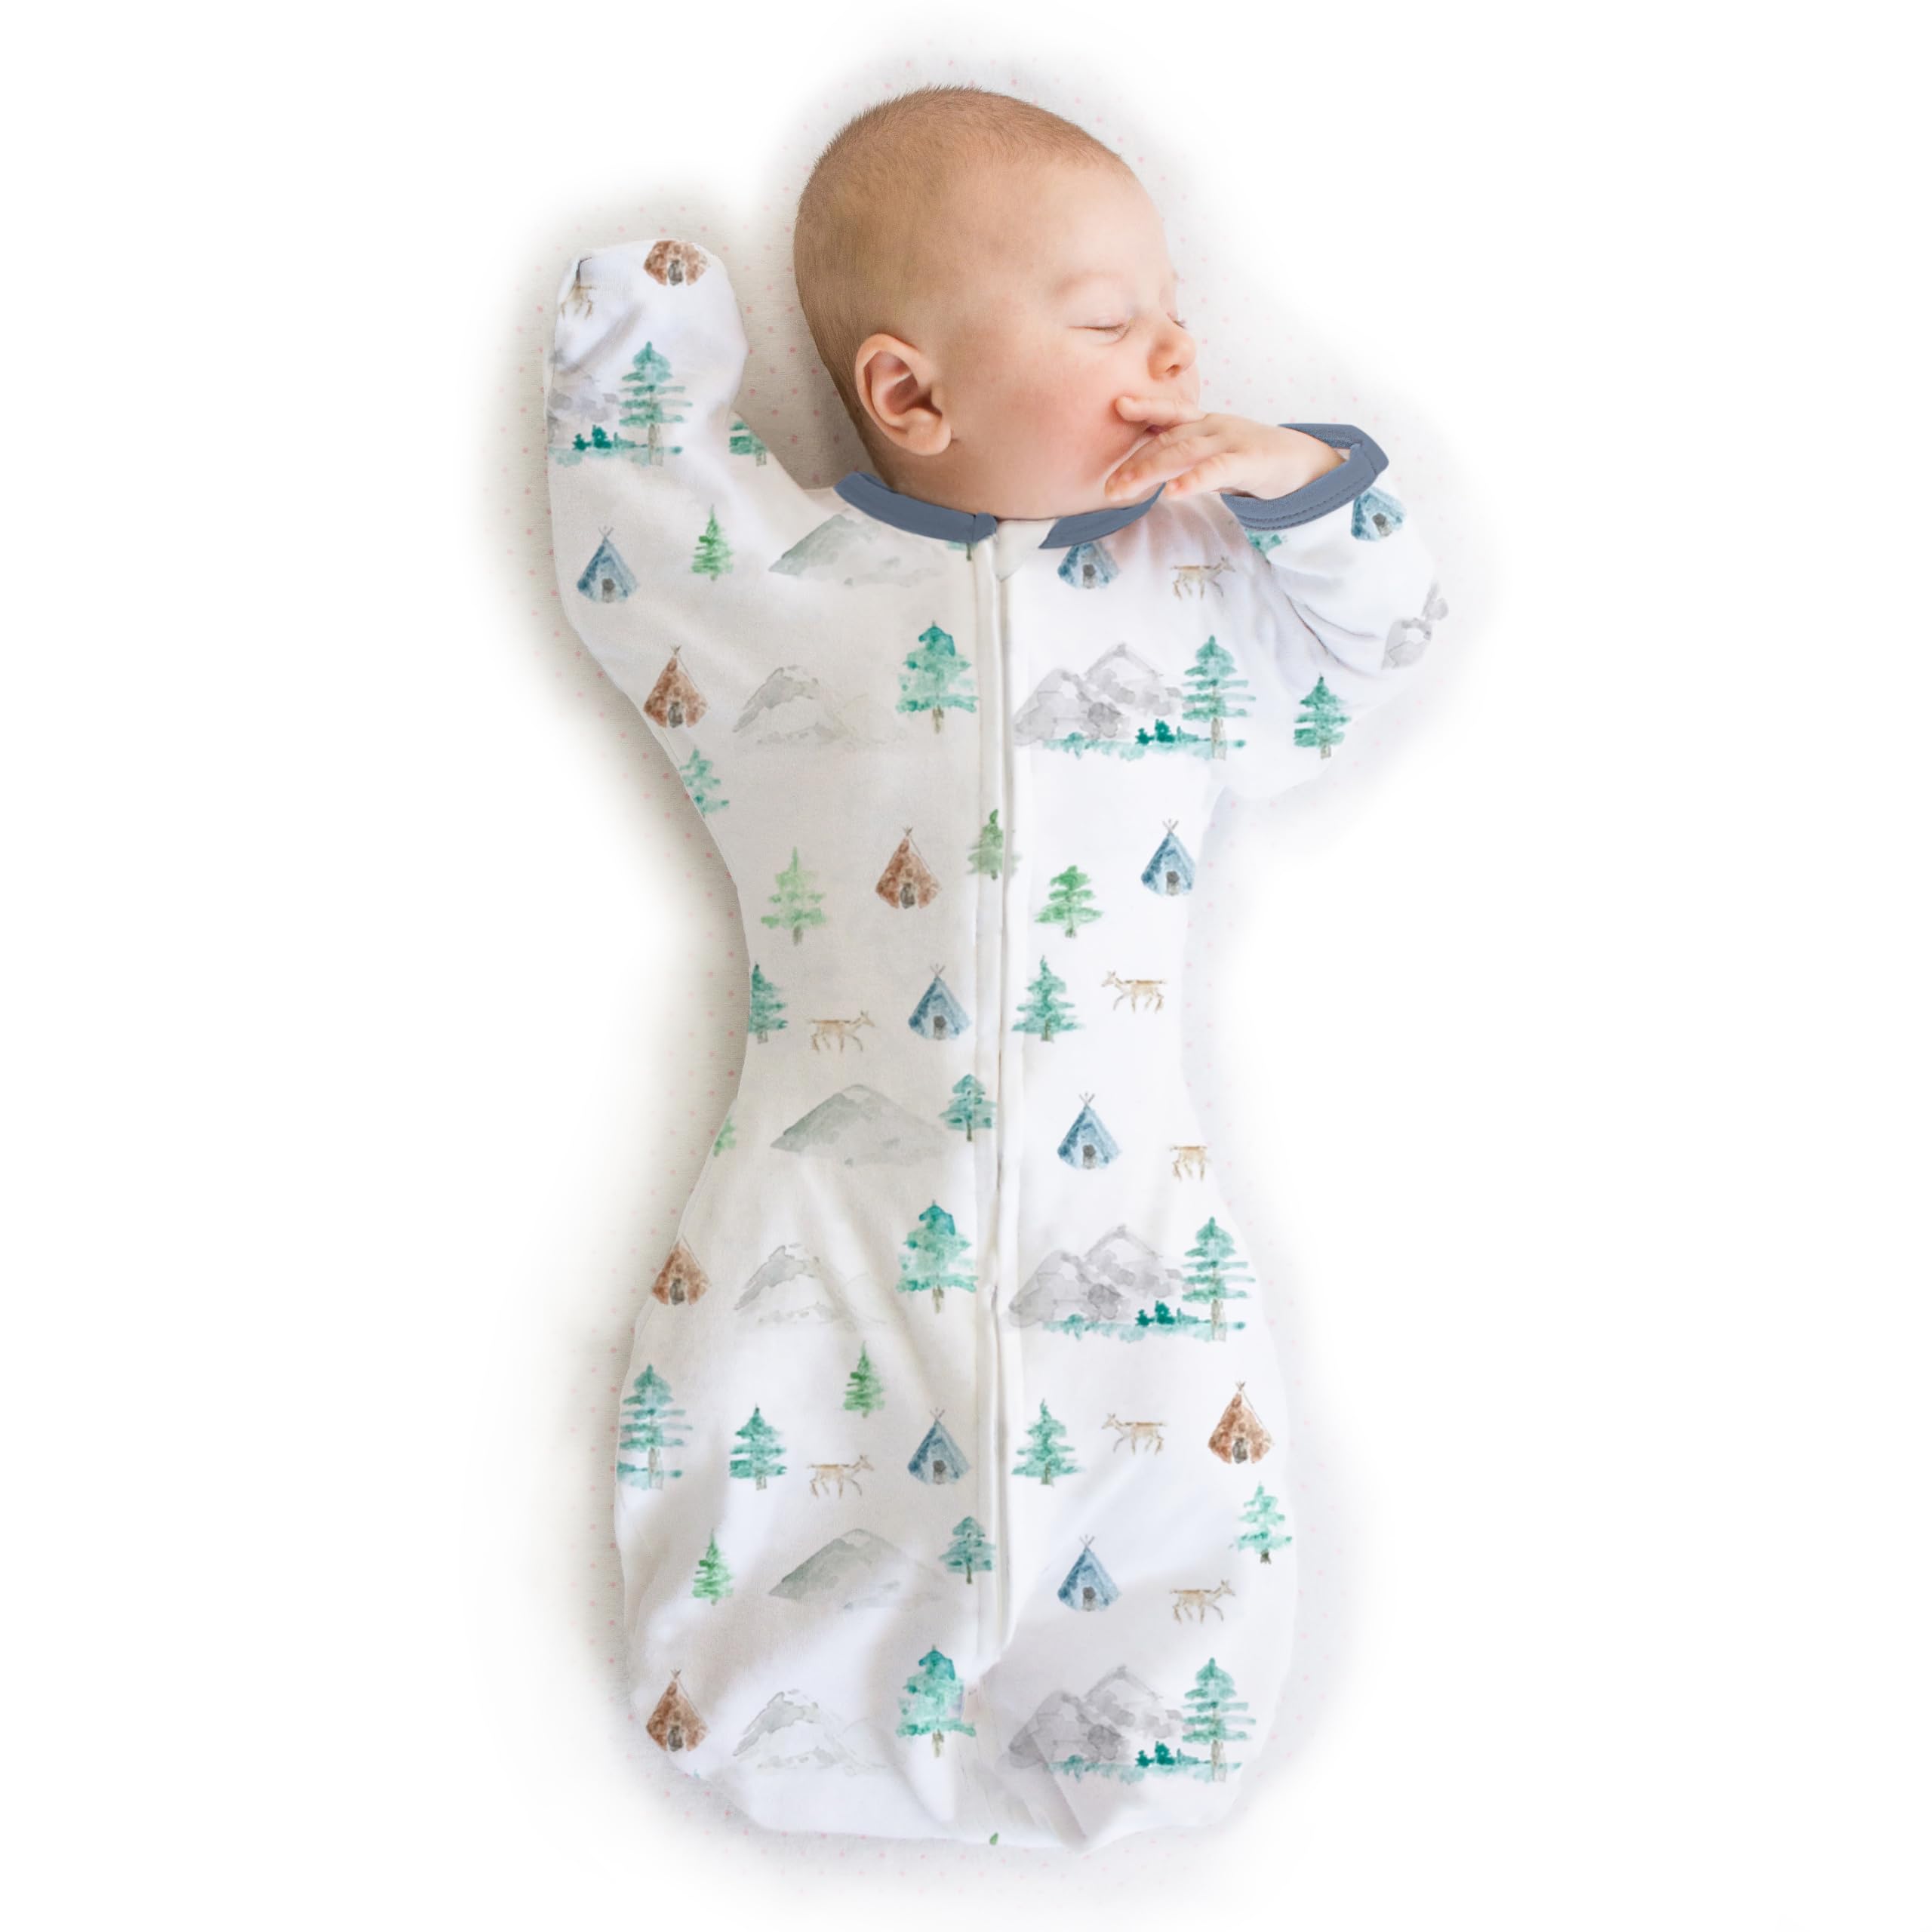 SwaddleDesigns Transitional Swaddle Sack with Arms Up Half-Length Sleeves and Mitten Cuffs, Watercolor Mountains & Trees, Medium, 3-6 Mo, 14-21 lbs (Better Sleep, Easy Swaddle Transition)